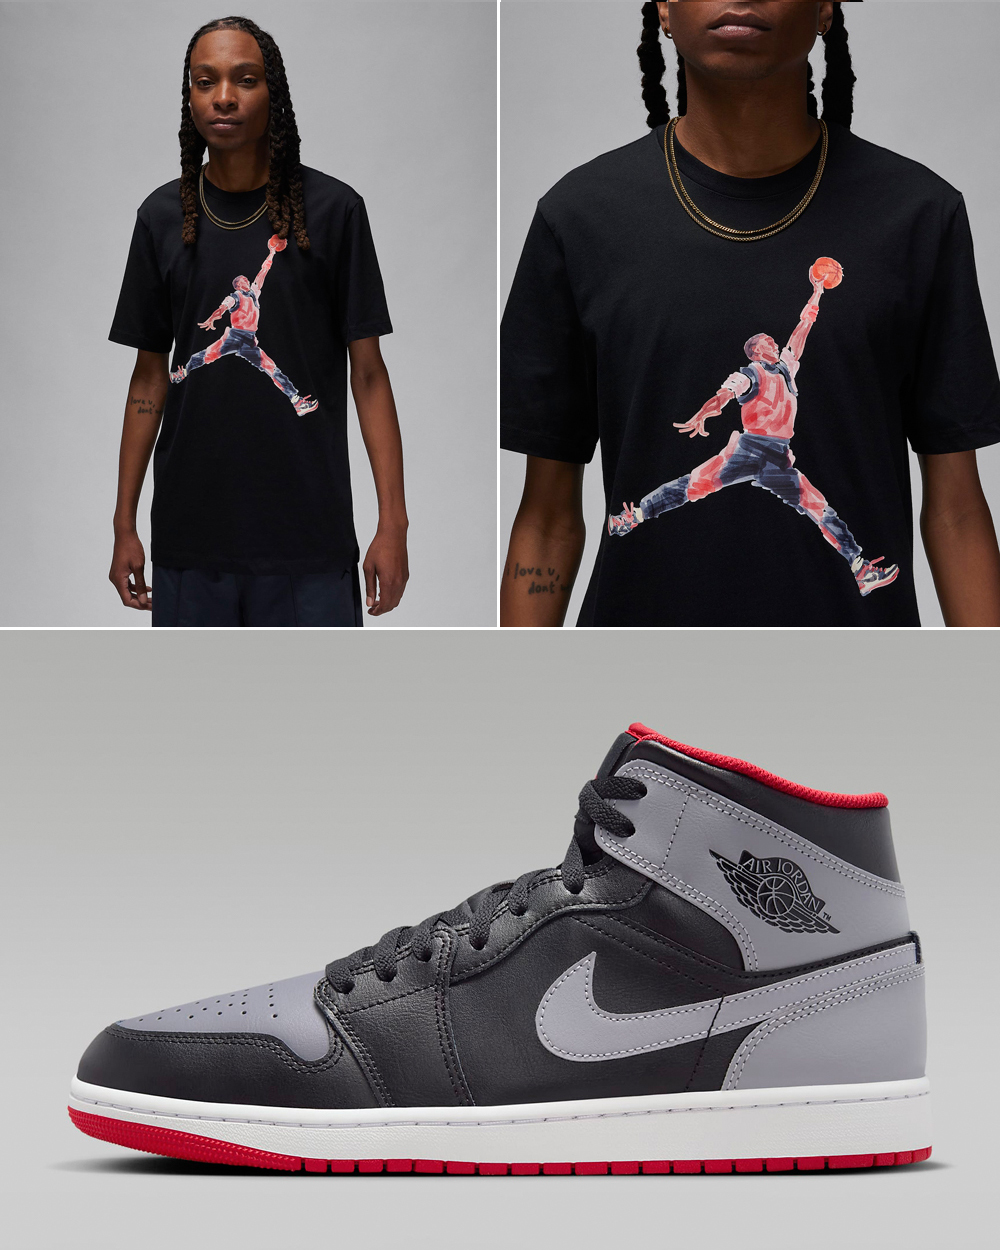 Air-Jordan-1-Mid-Black-Fire-Red-Cement-Grey-T-Shirt-Matching-Outfit